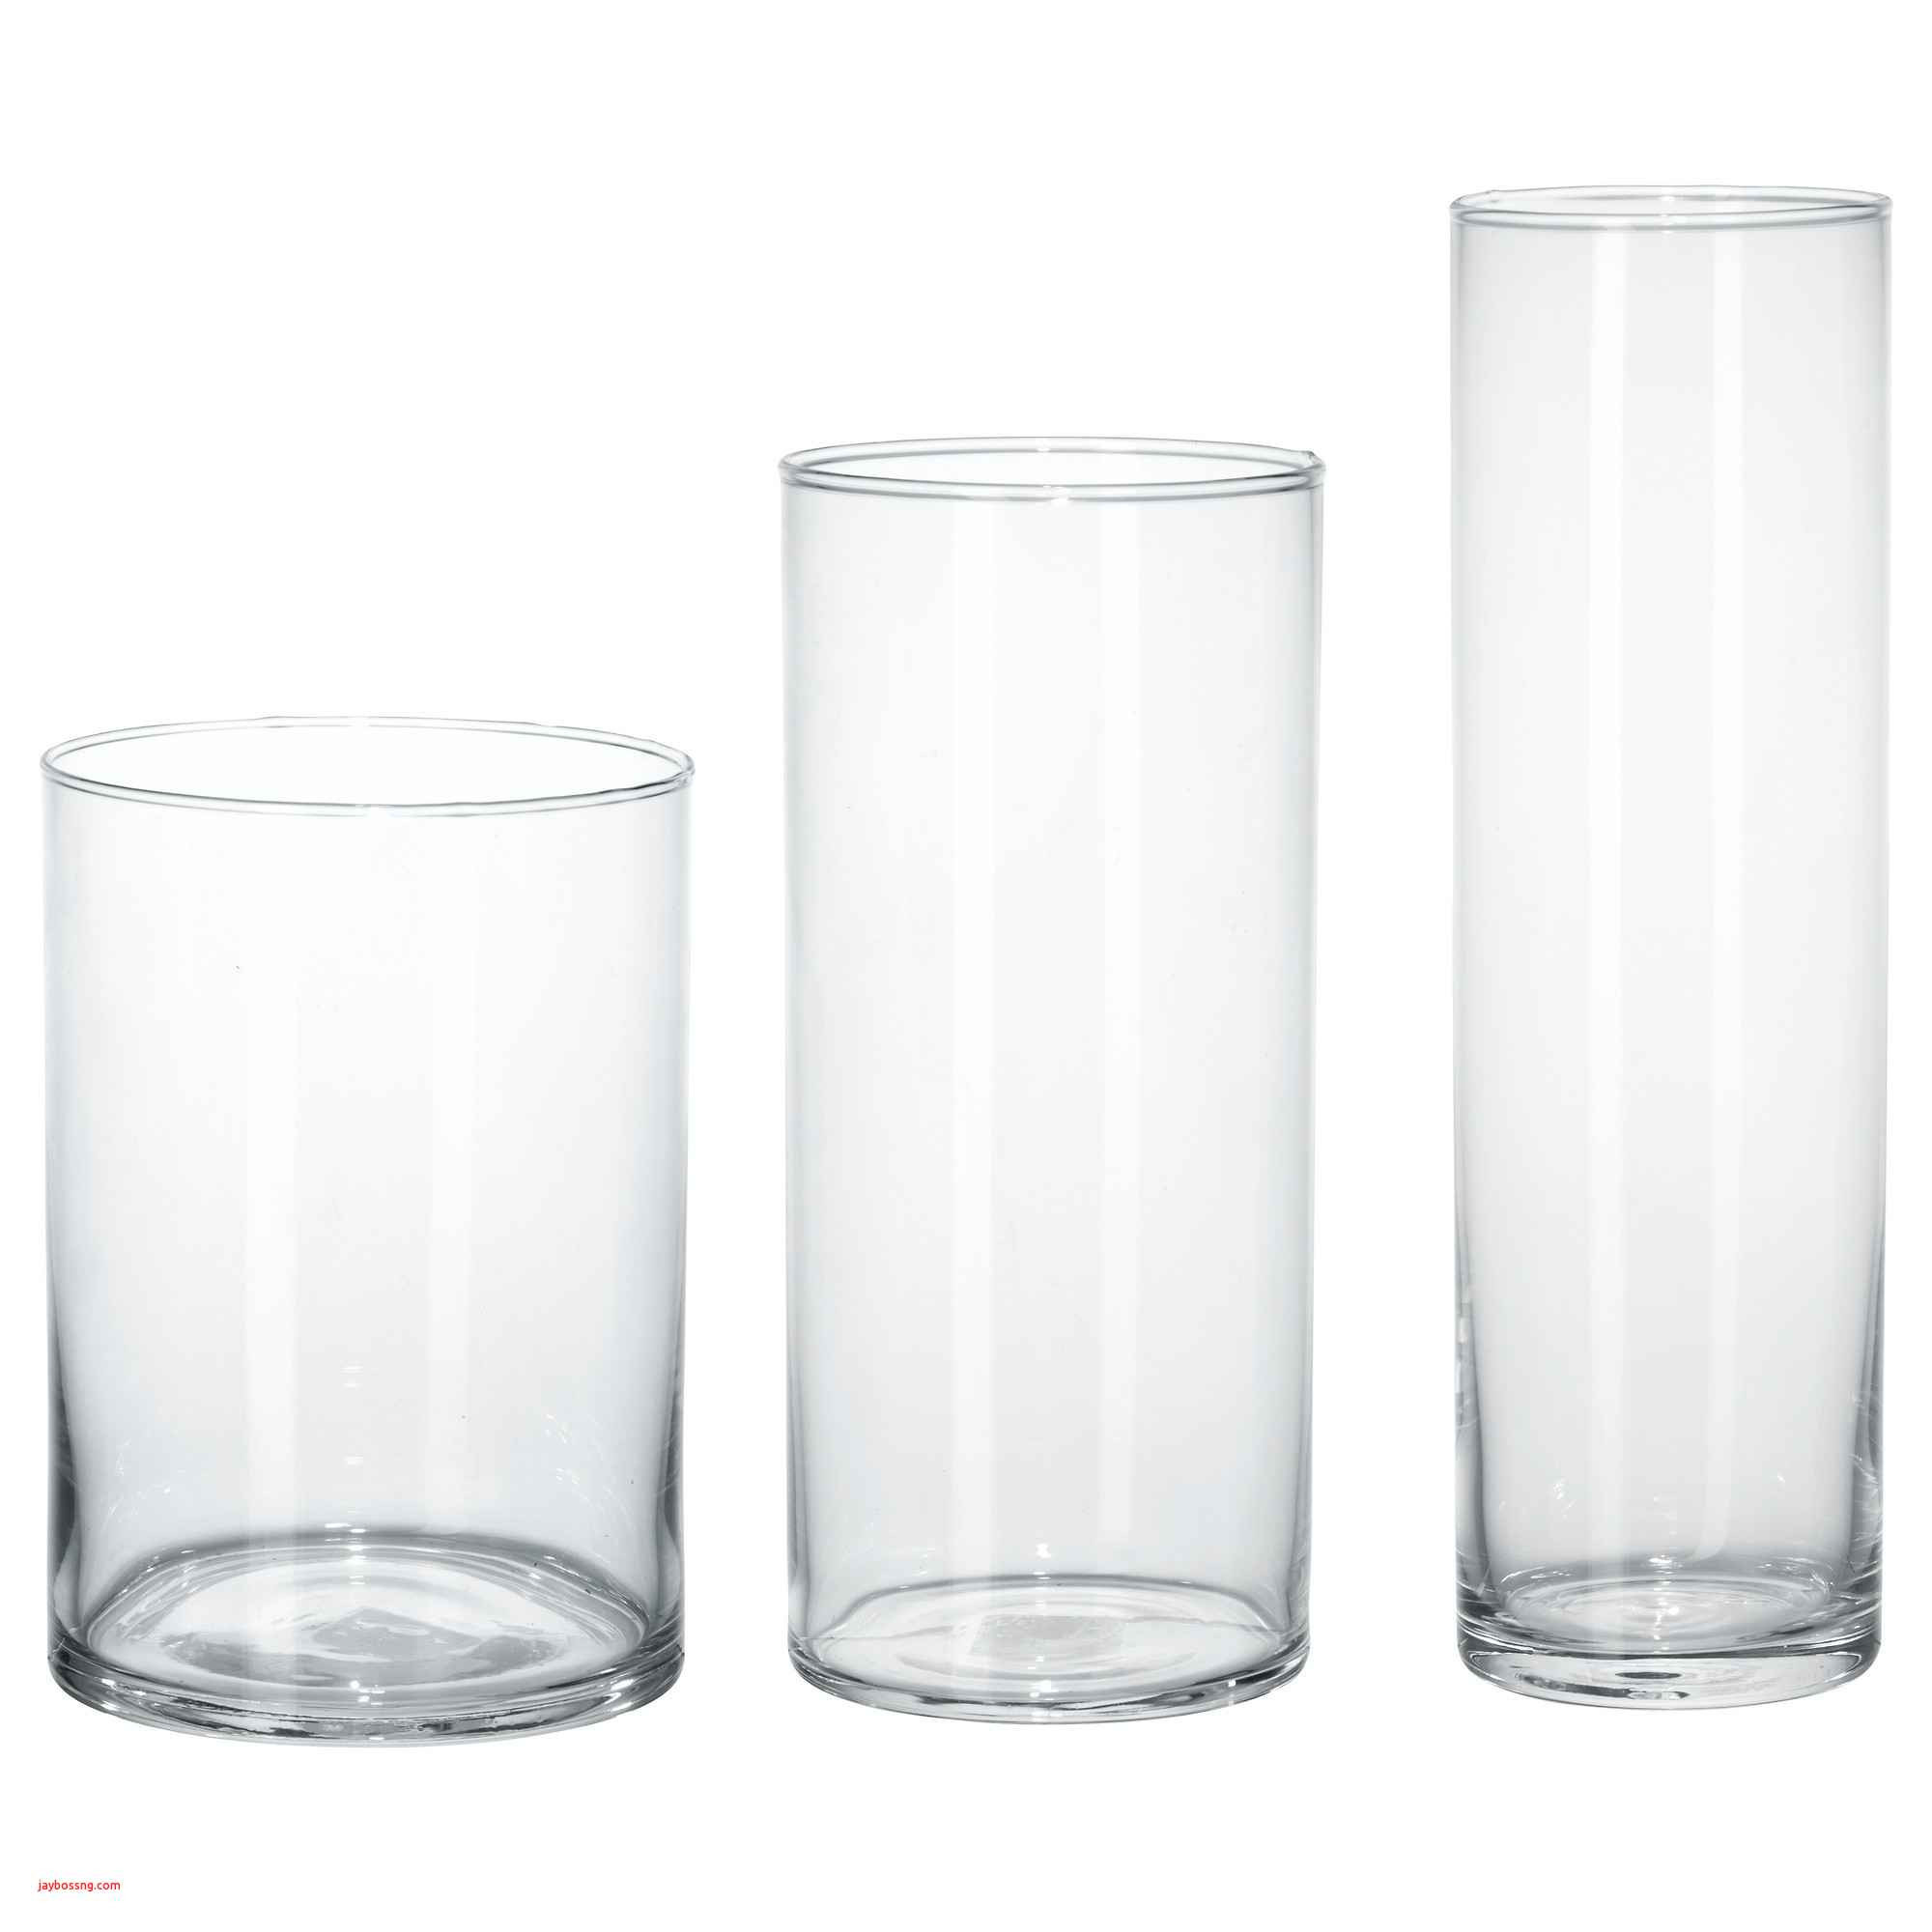 26 Unique Black and White Vase Fillers 2024 free download black and white vase fillers of black vase fillers photograph ikea white table created pe s5h vases with black vase fillers photograph ikea white table created pe s5h vases ikea vase i 0d bl